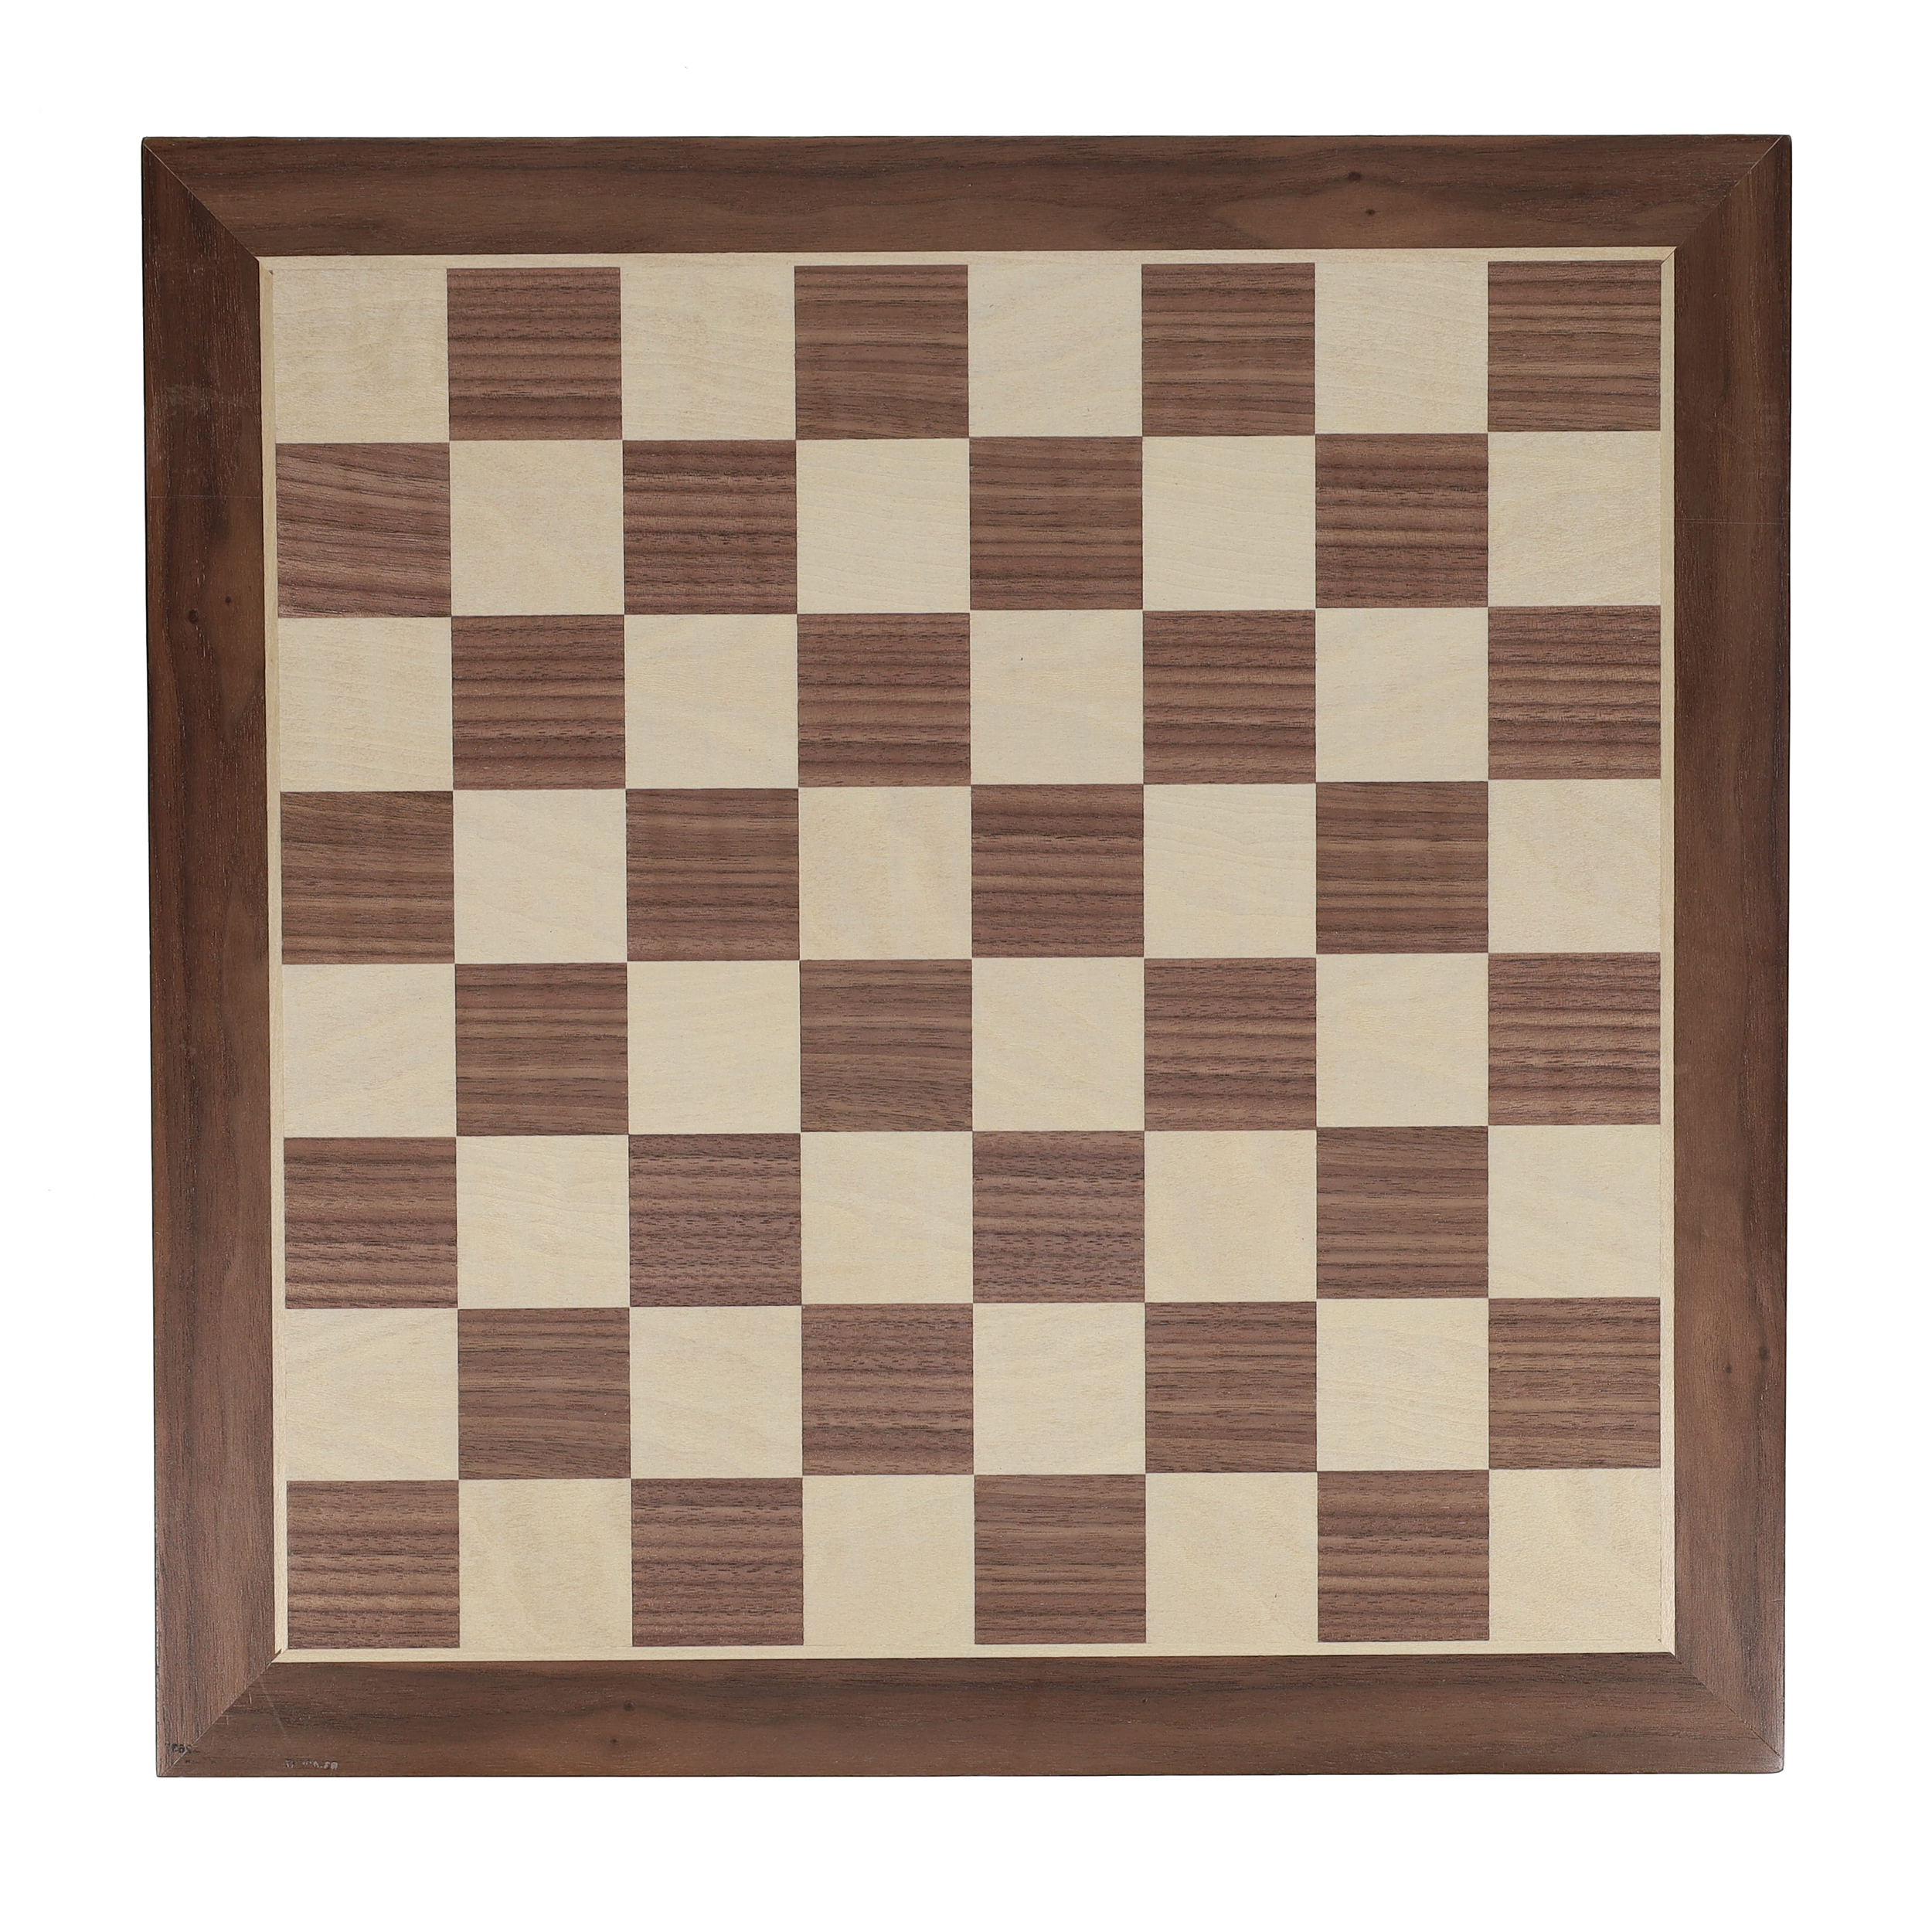 4 Player Vinyl Chess Board - 1.56 Squares